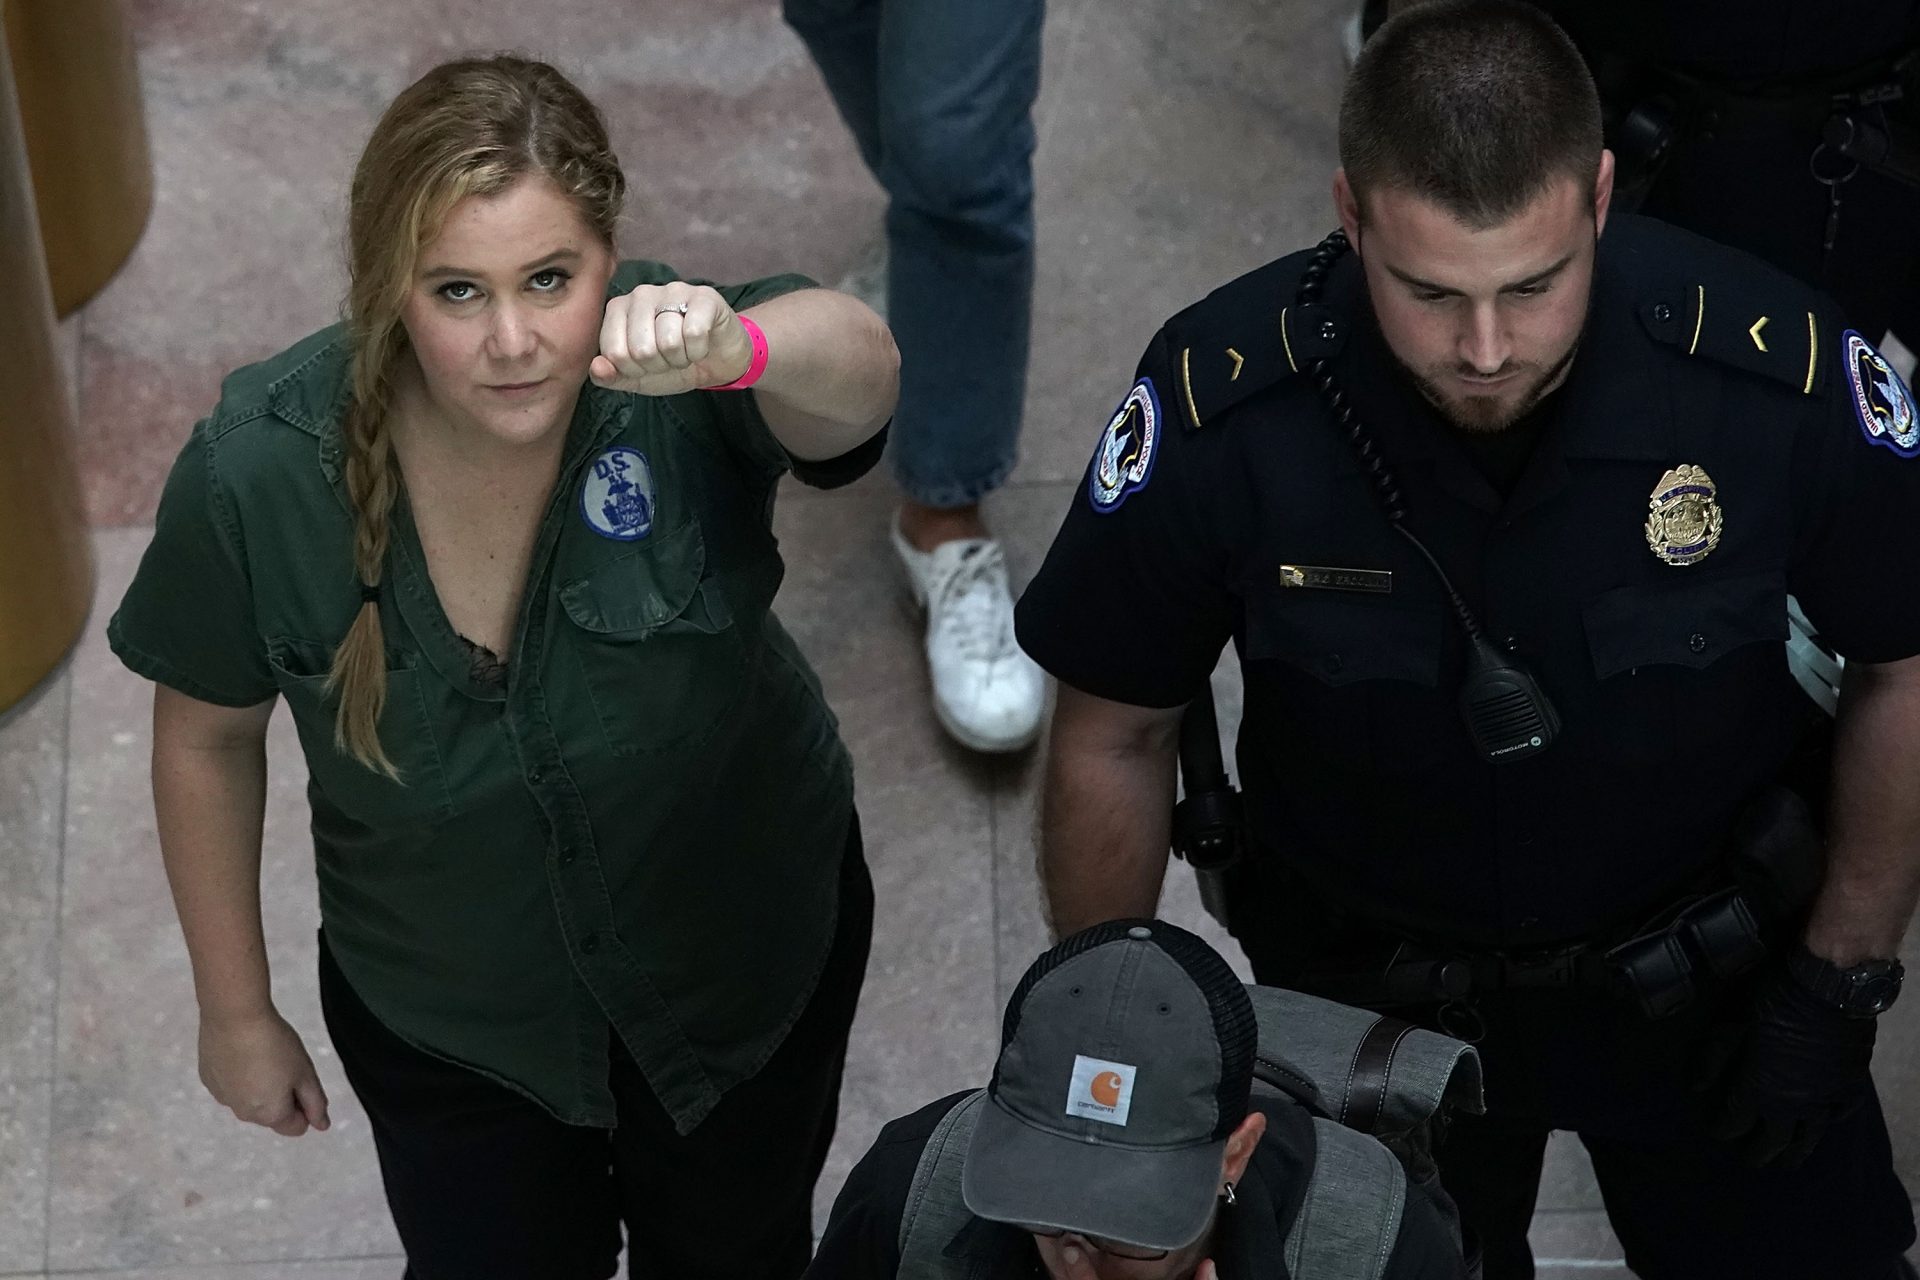 Amy Schumer: “There is no other side”